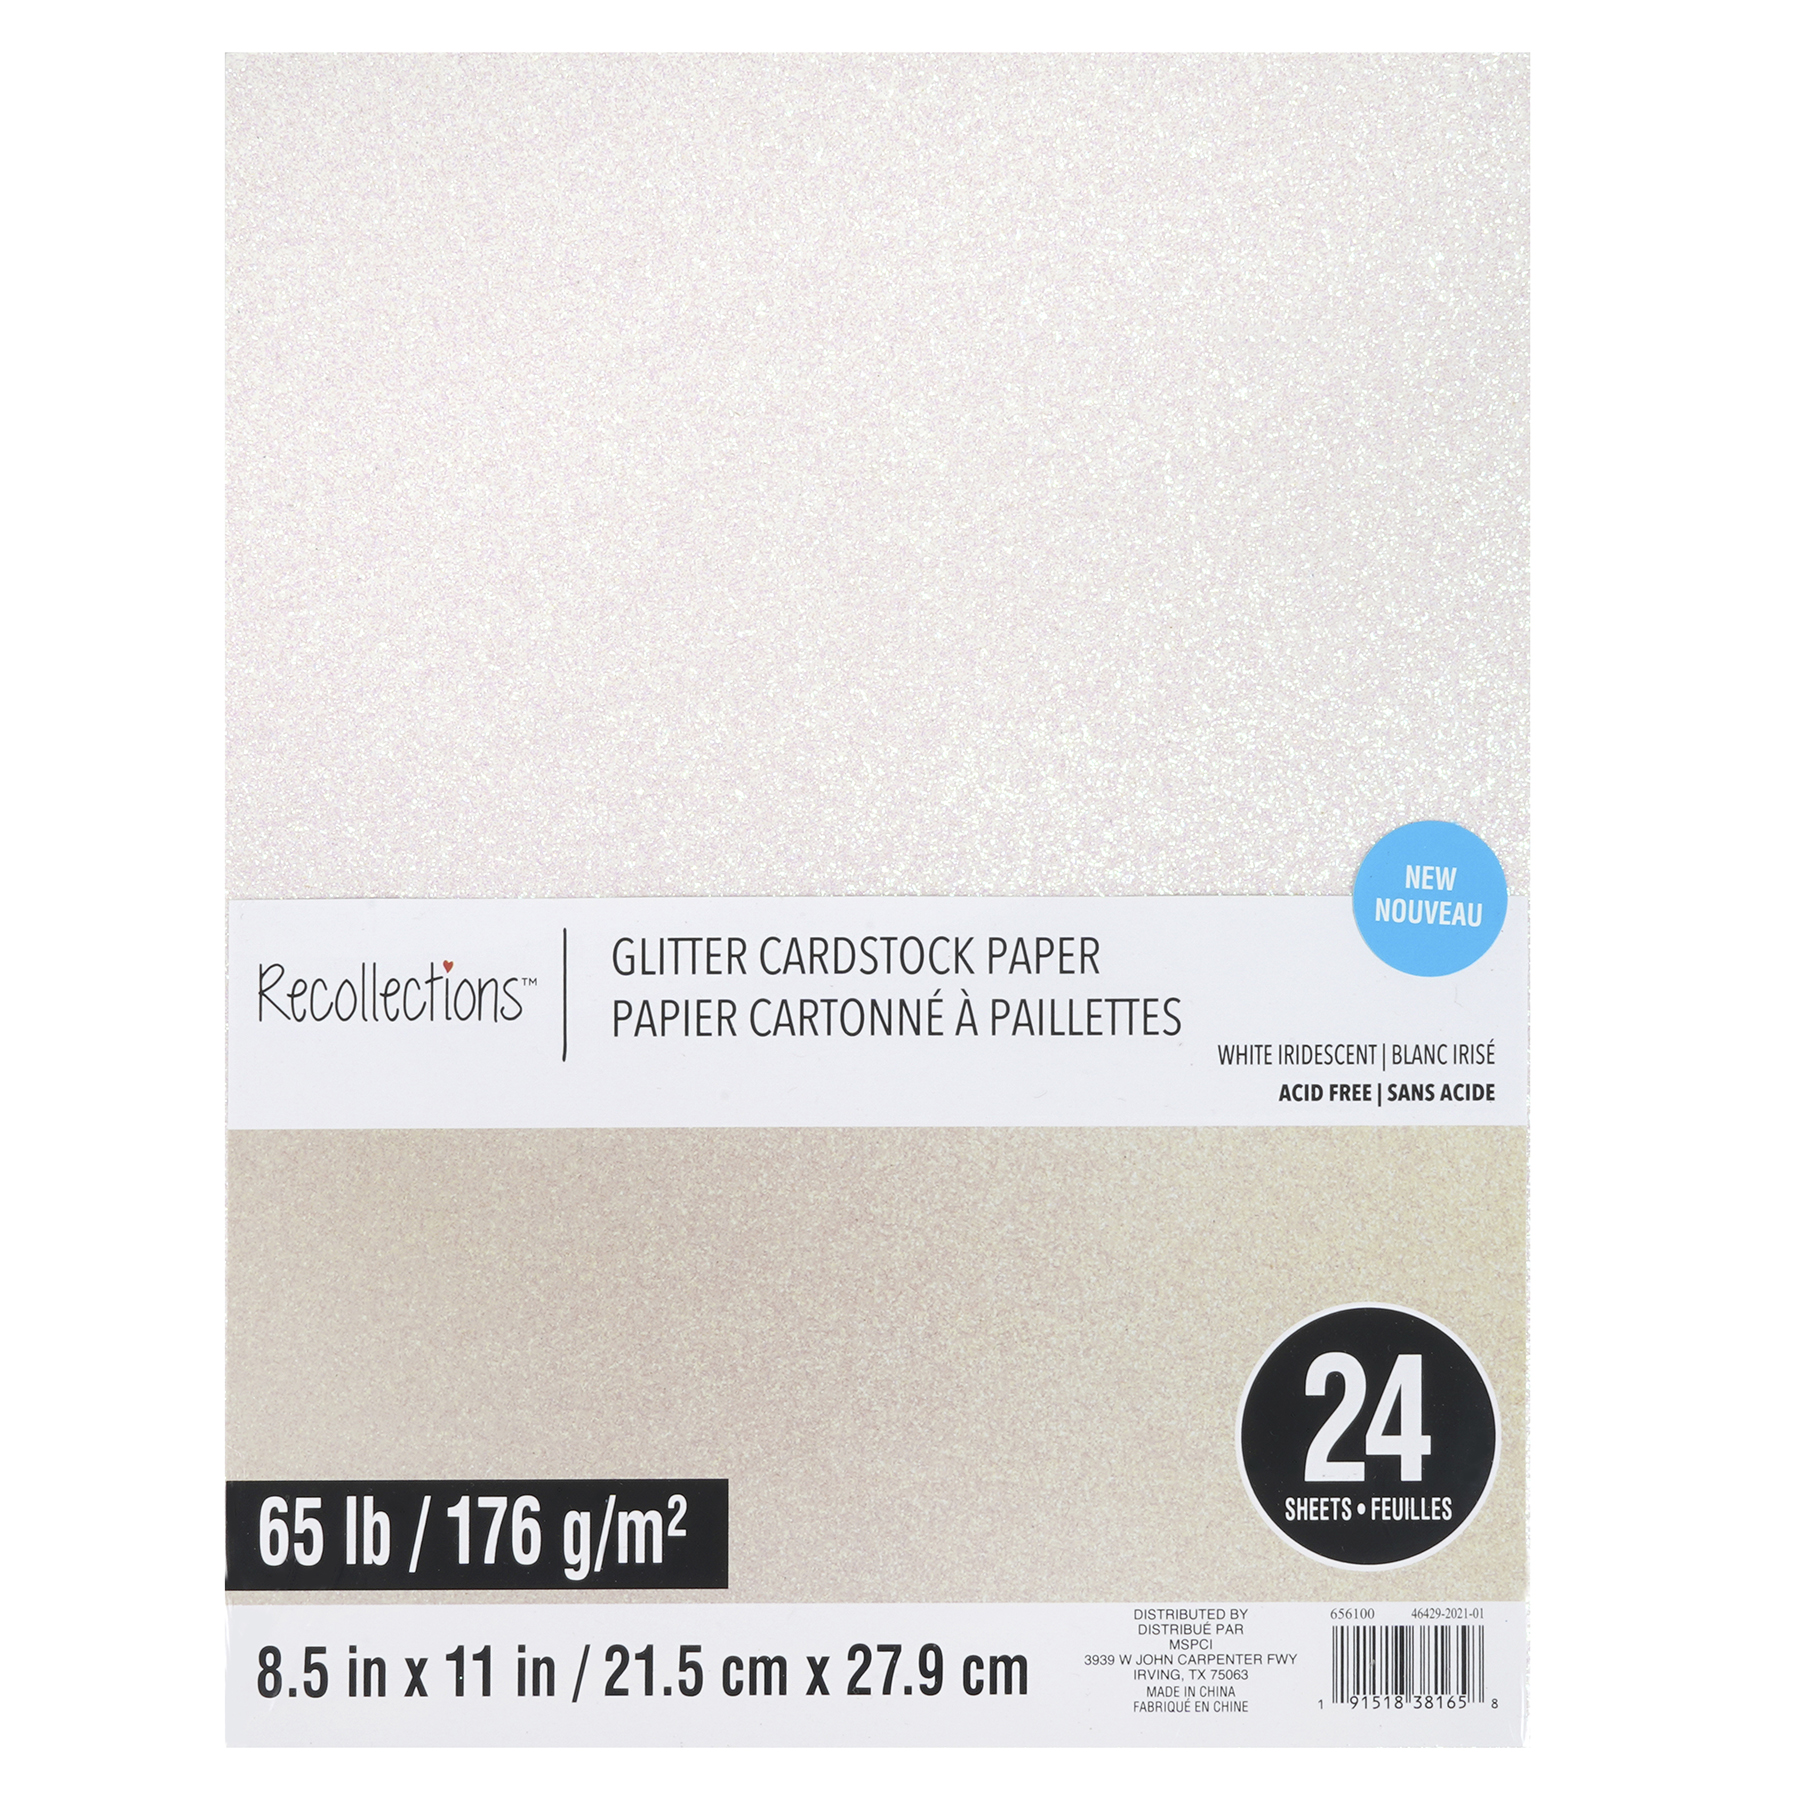 White Glitter Cardstock Paper by Recollections™, 8.5 x 11